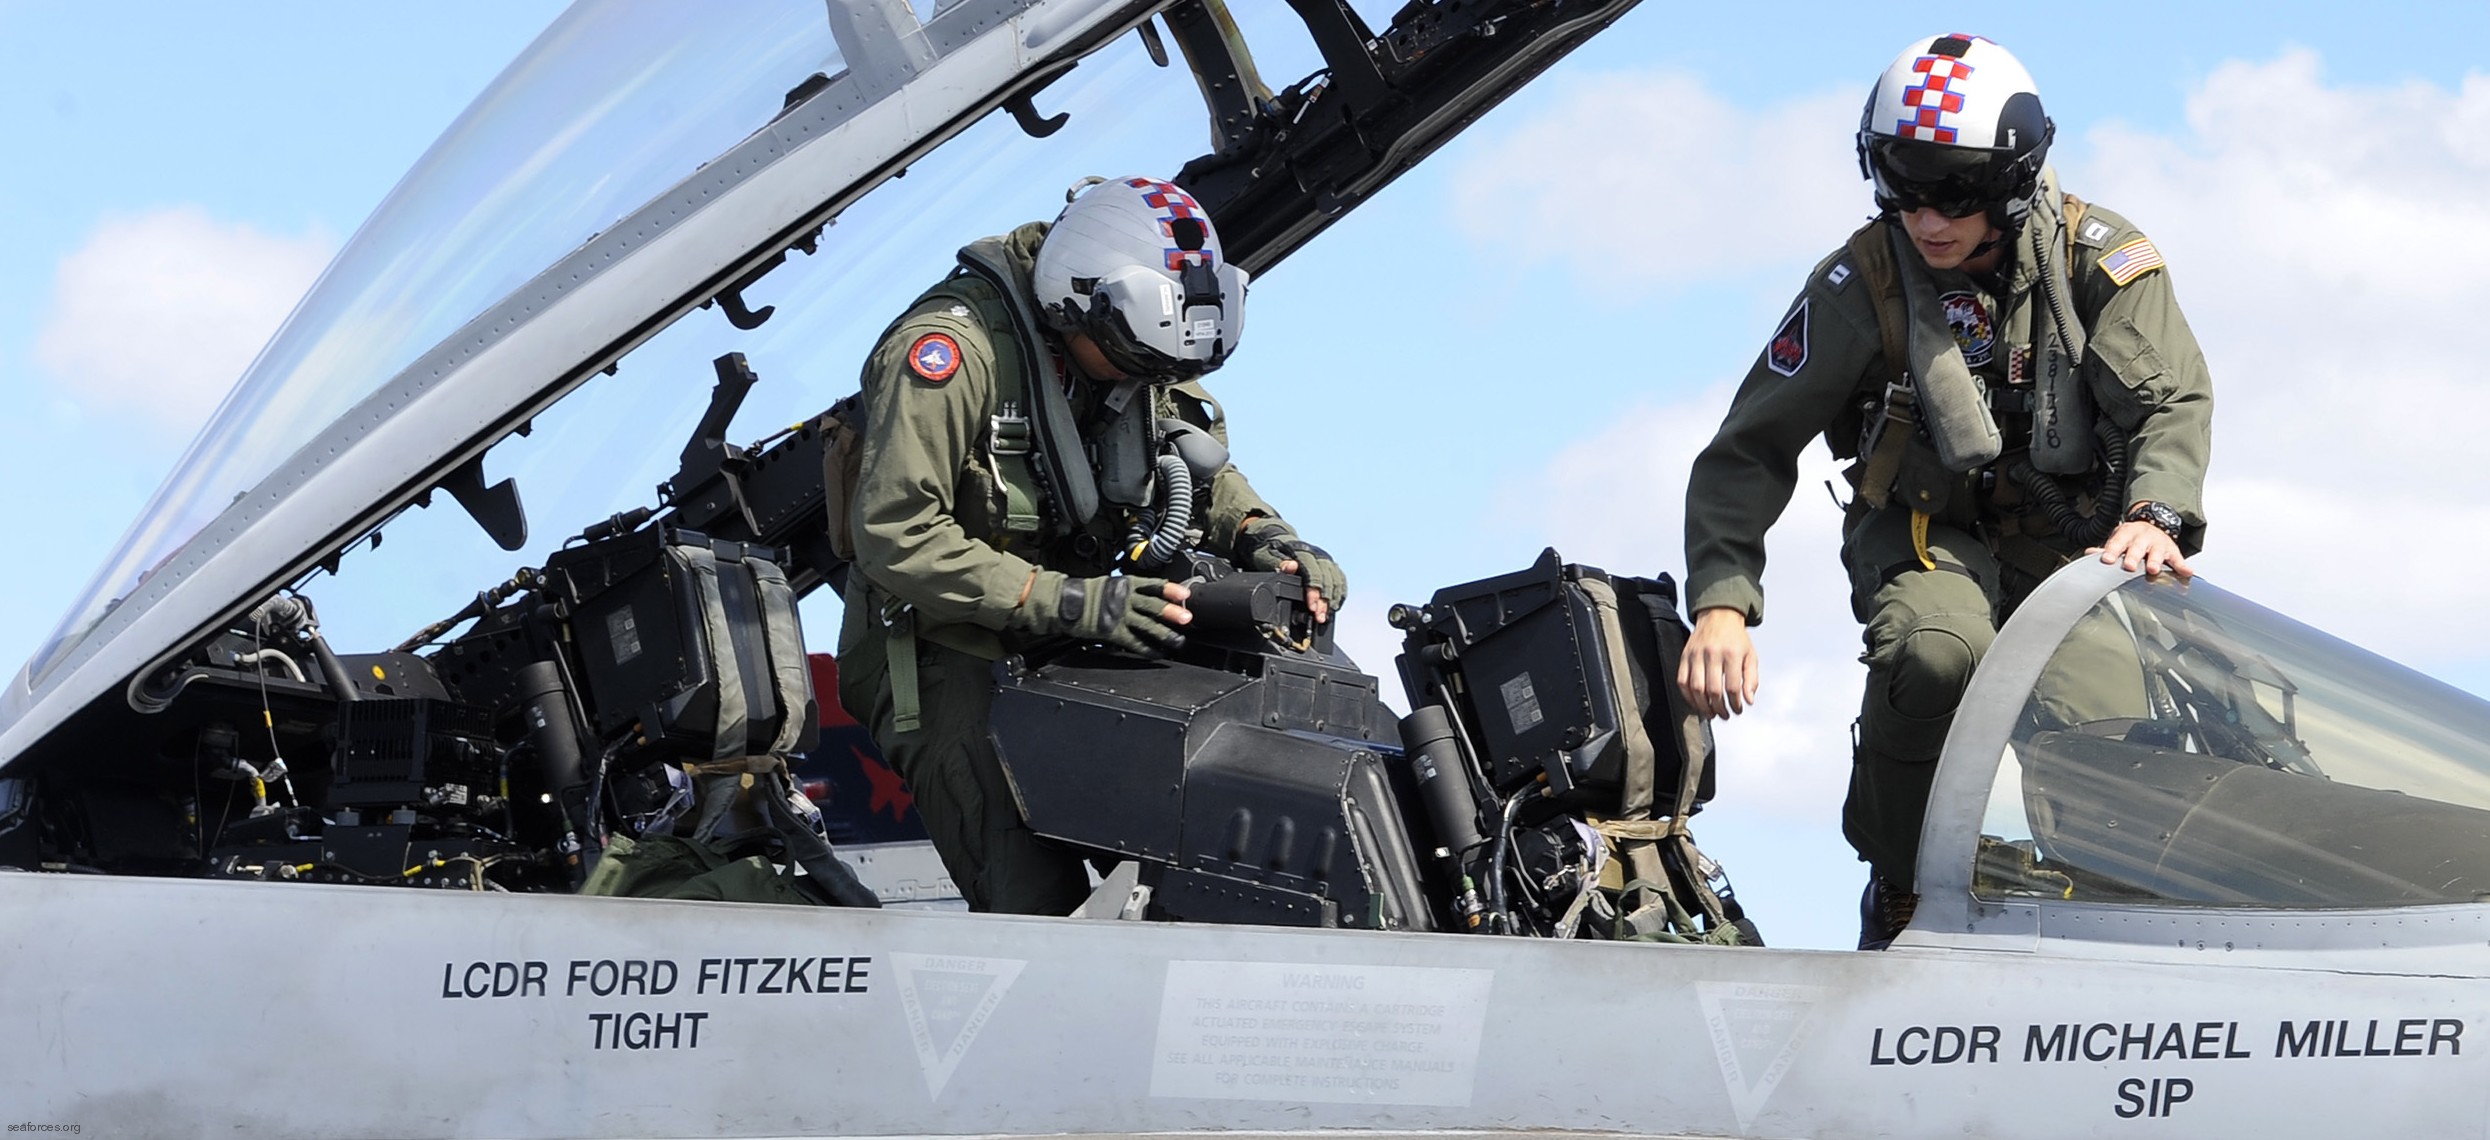 vfa-211 fighting checkmates strike fighter squadron f/a-18f super hornet navy carrier air wing cvw-1 uss harry s. truman cvn-75 93a cockpit ejection seat